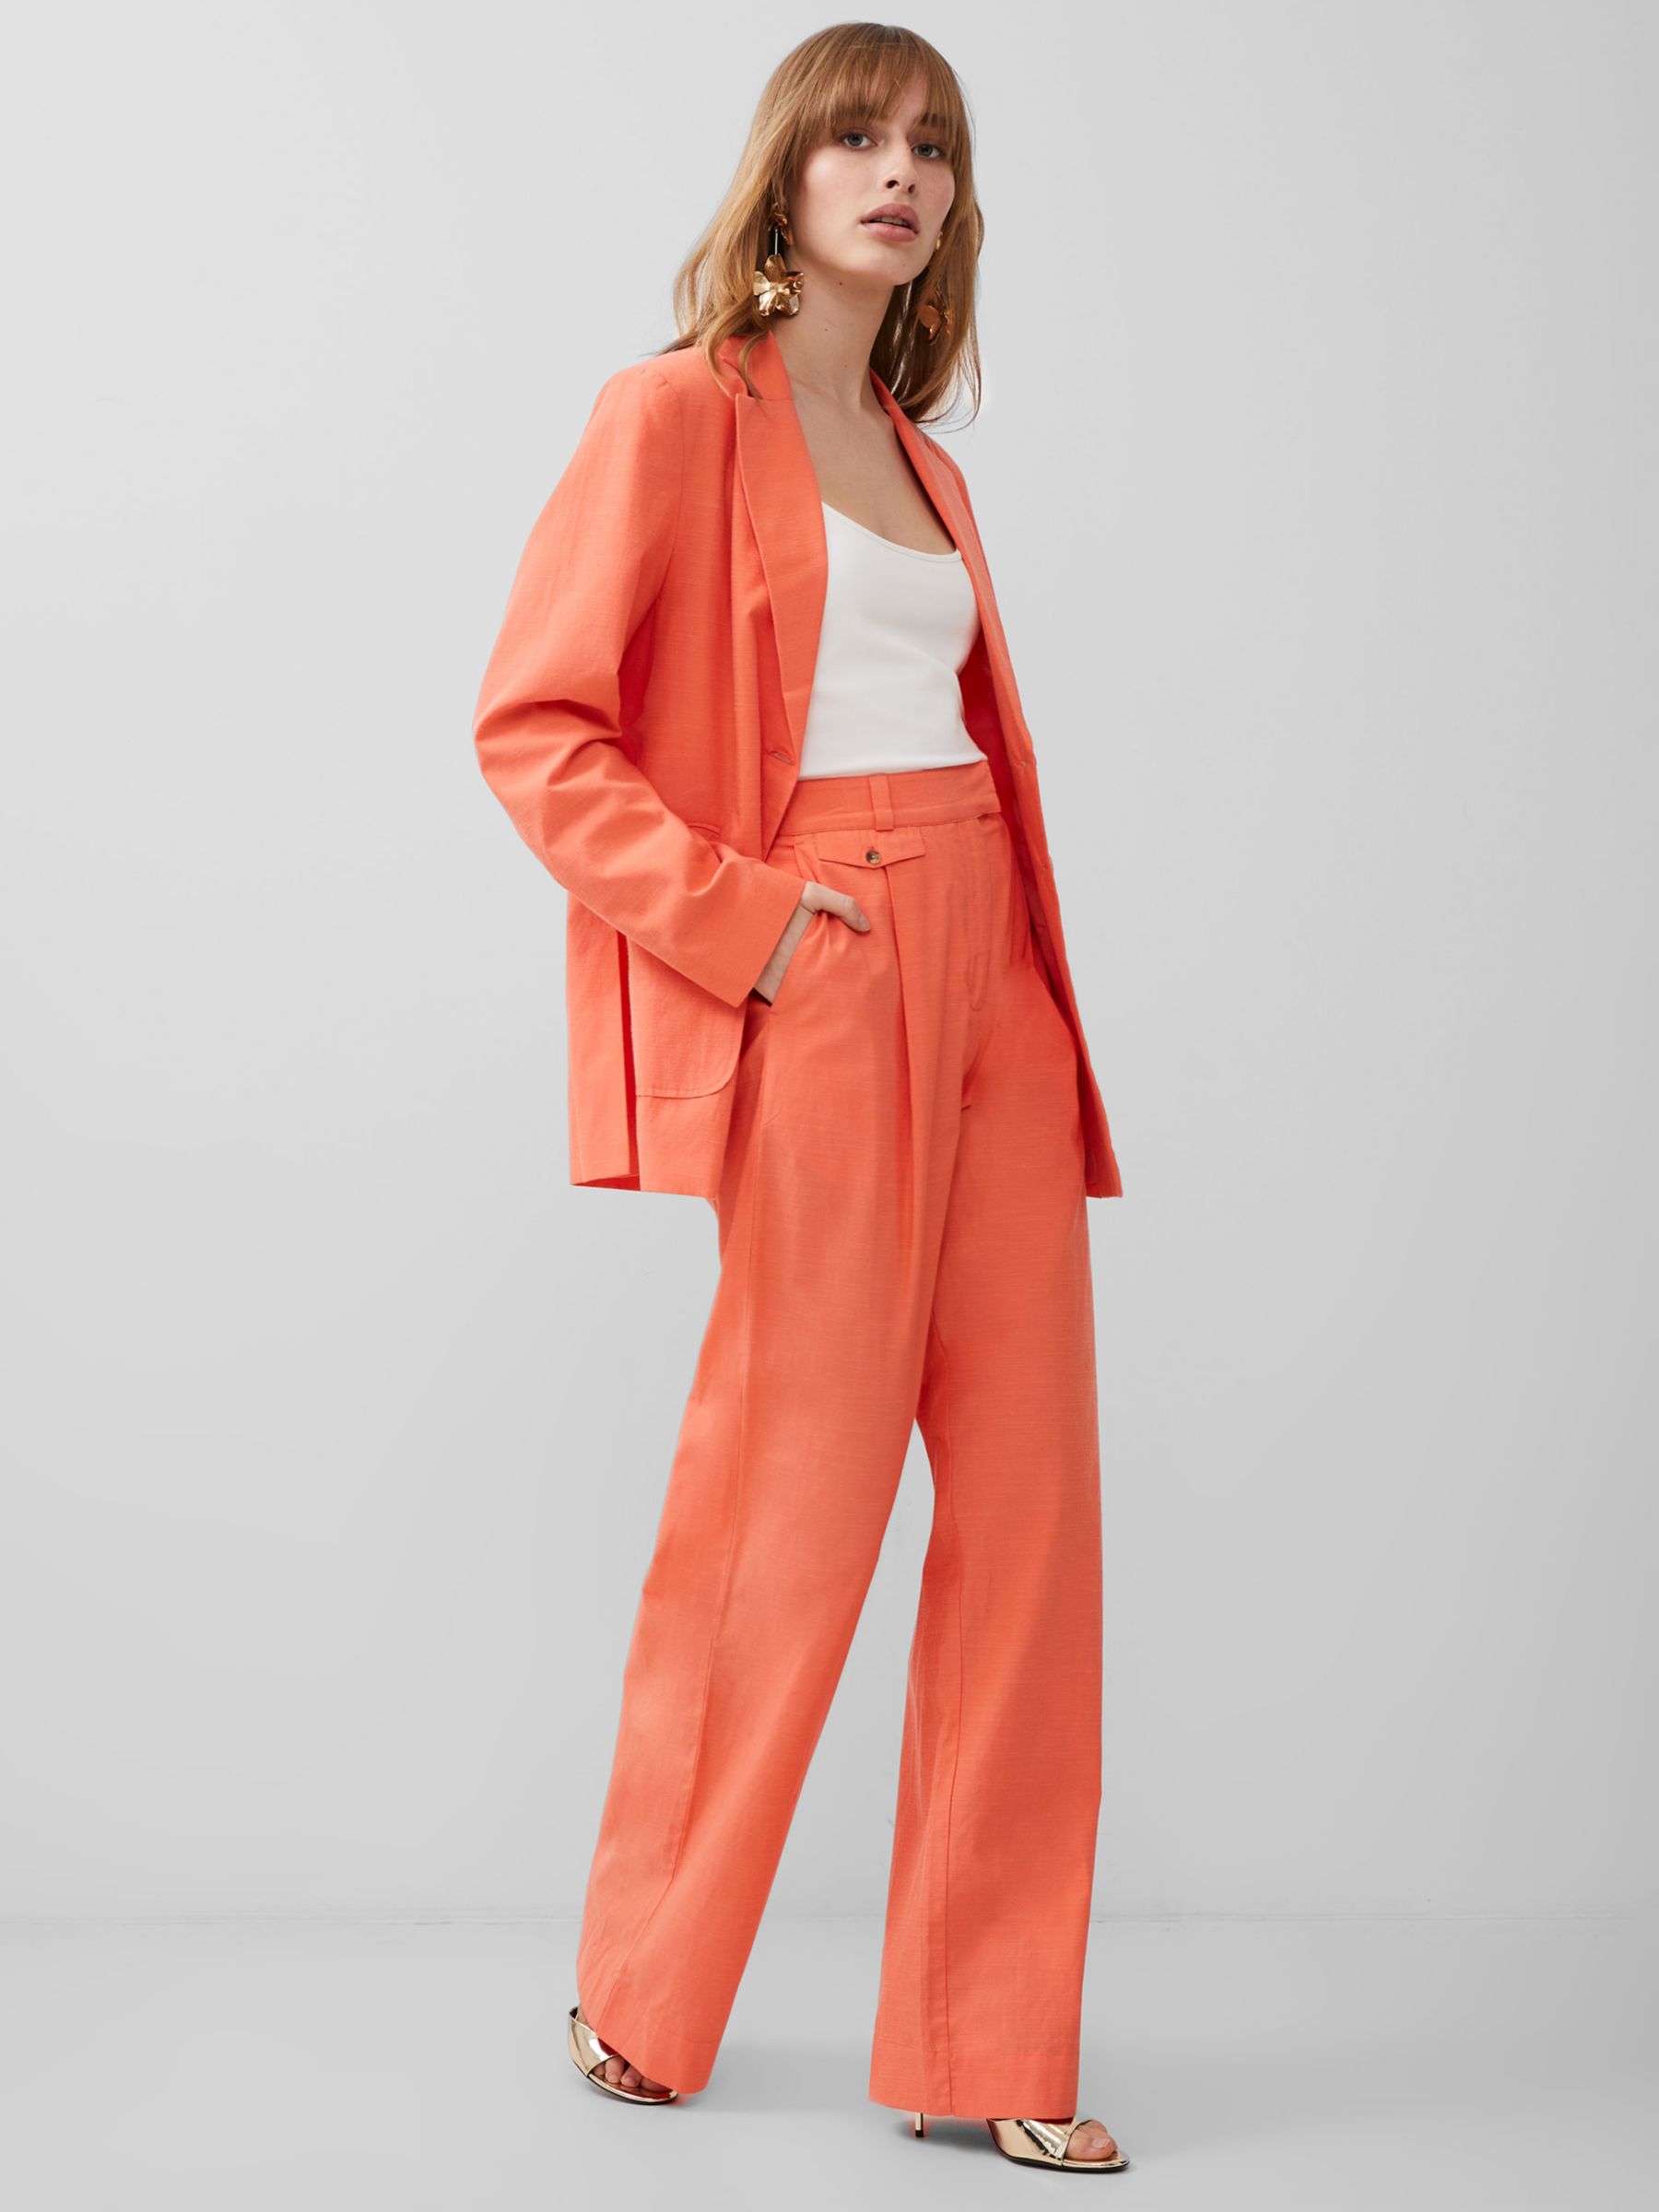 French Connection Alania City Trousers, Coral, 6